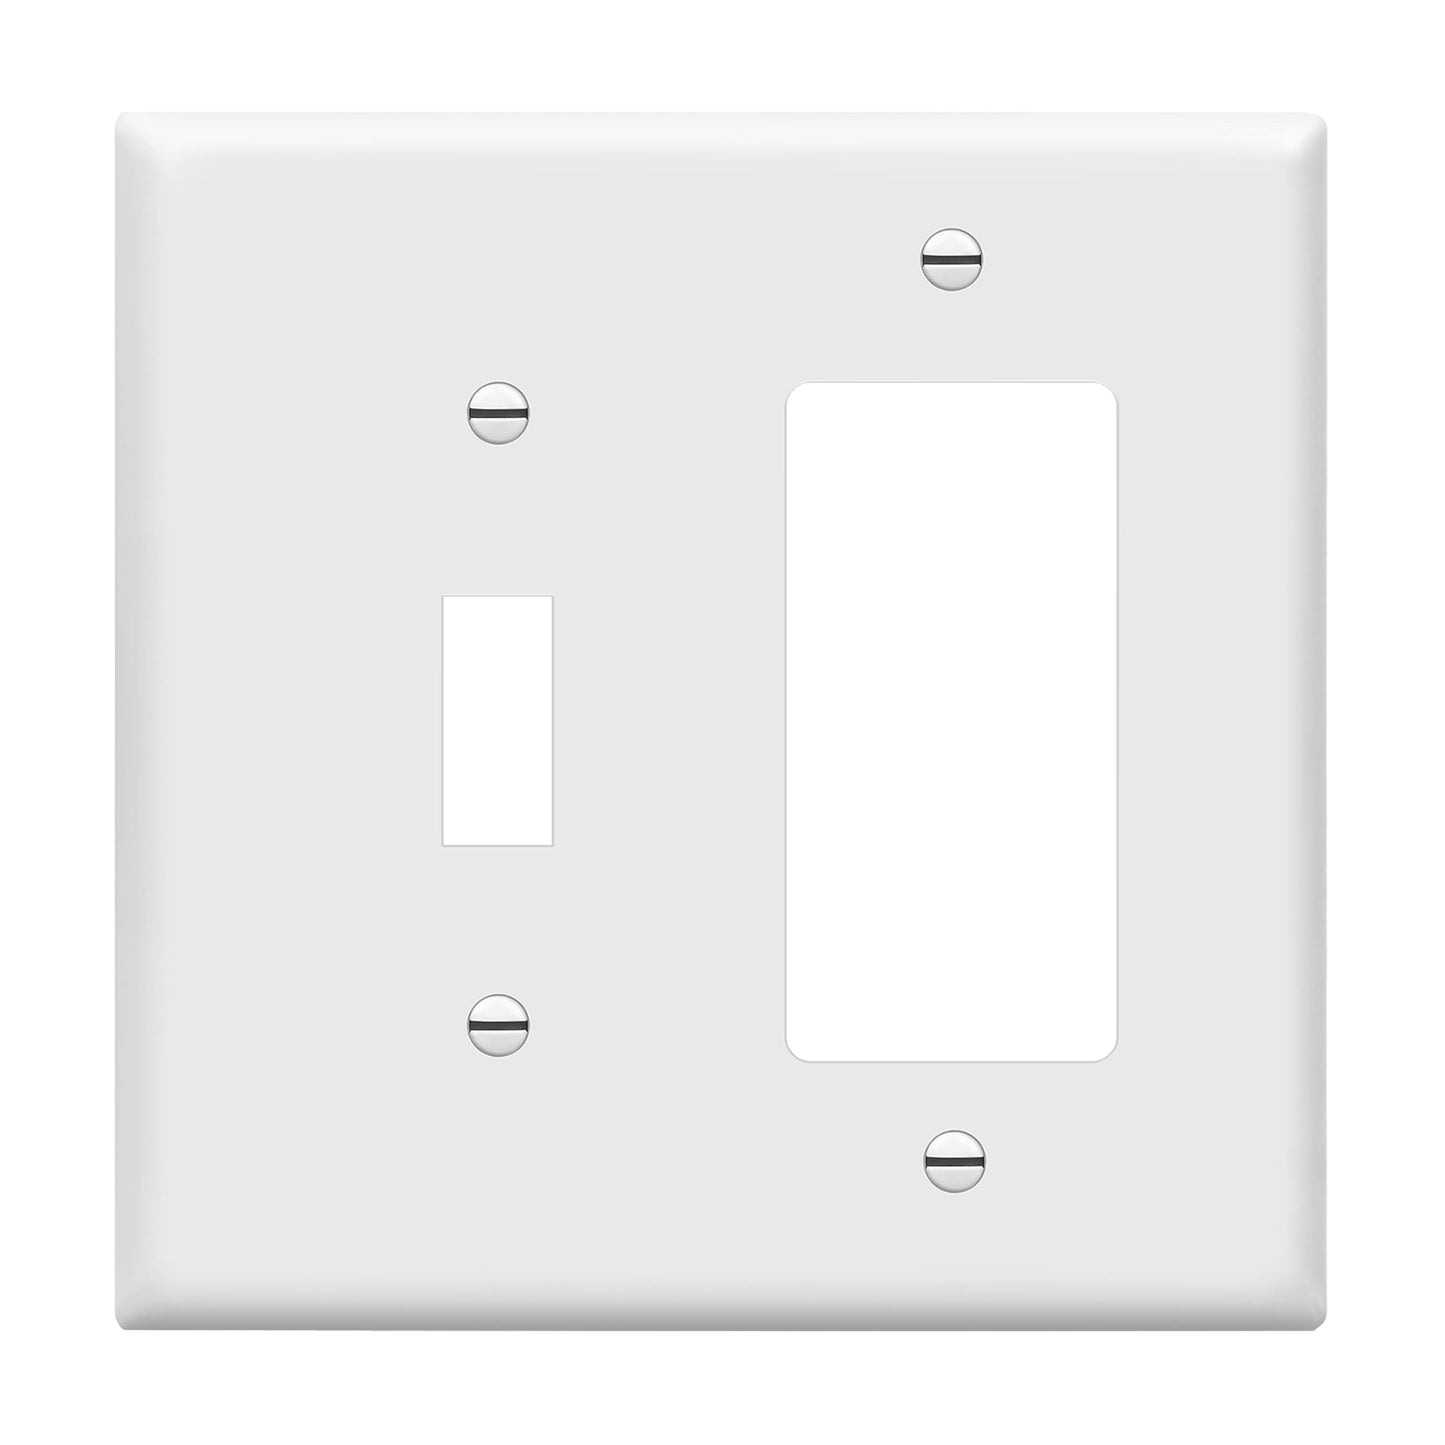 ENERLITES Combination Toggle Light Switch/Decorator Light Switch Plate, Double Switch Wall Plate, Standard Size 2-Gang 4.50" x 4.57", Polycarbonate Thermoplastic, 881131-BK, Black